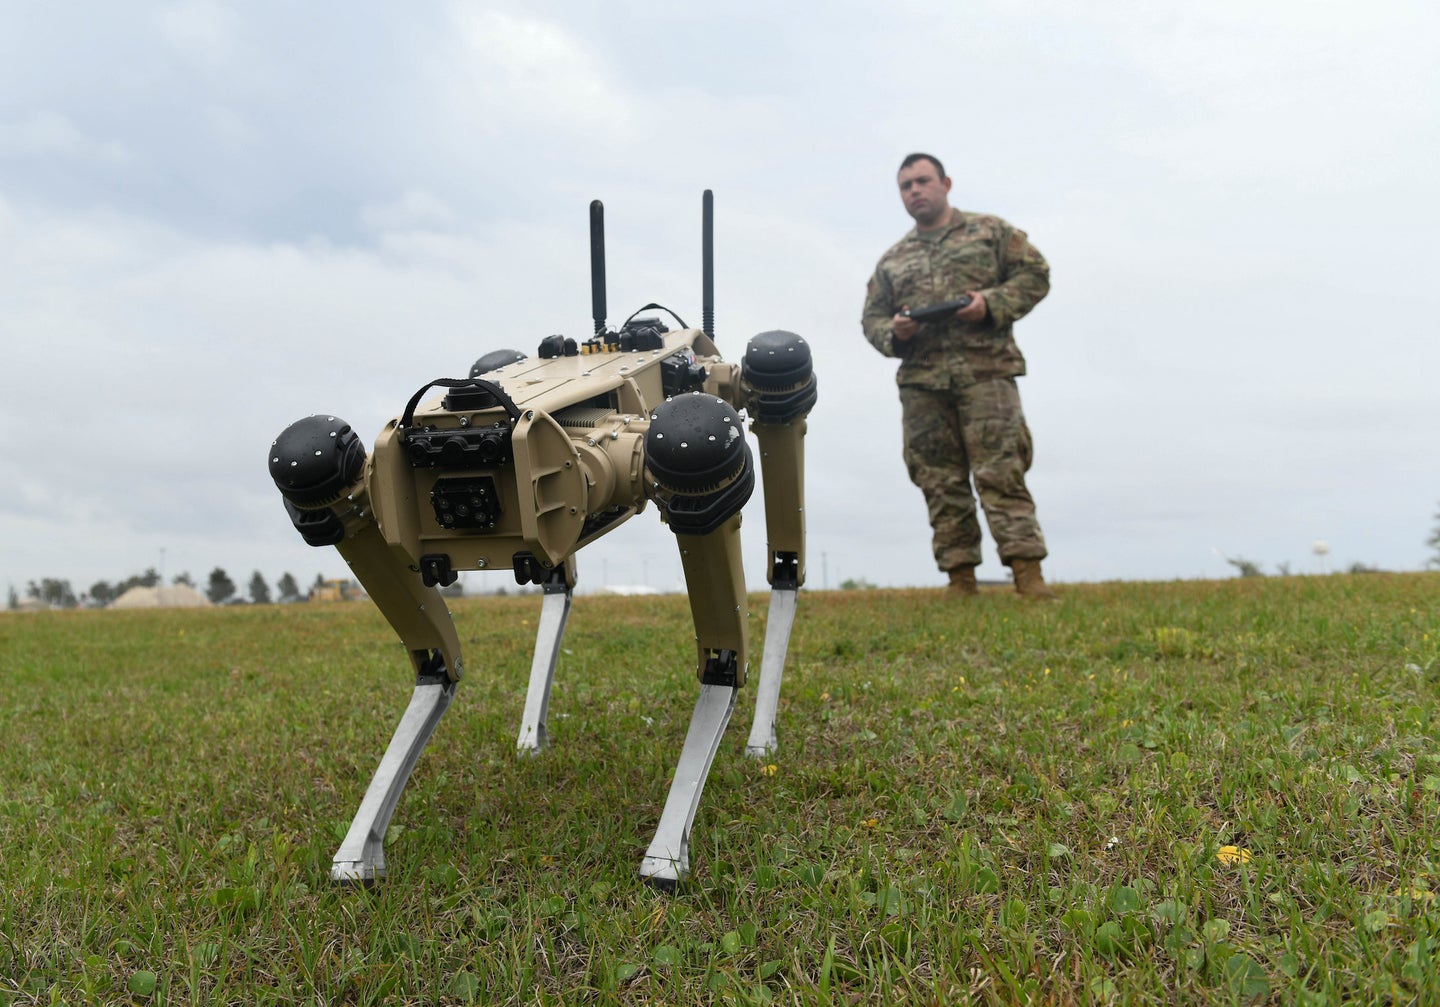 On the verge Telemacos Handbook The Air Force is testing out robots as guard dogs | Popular Science